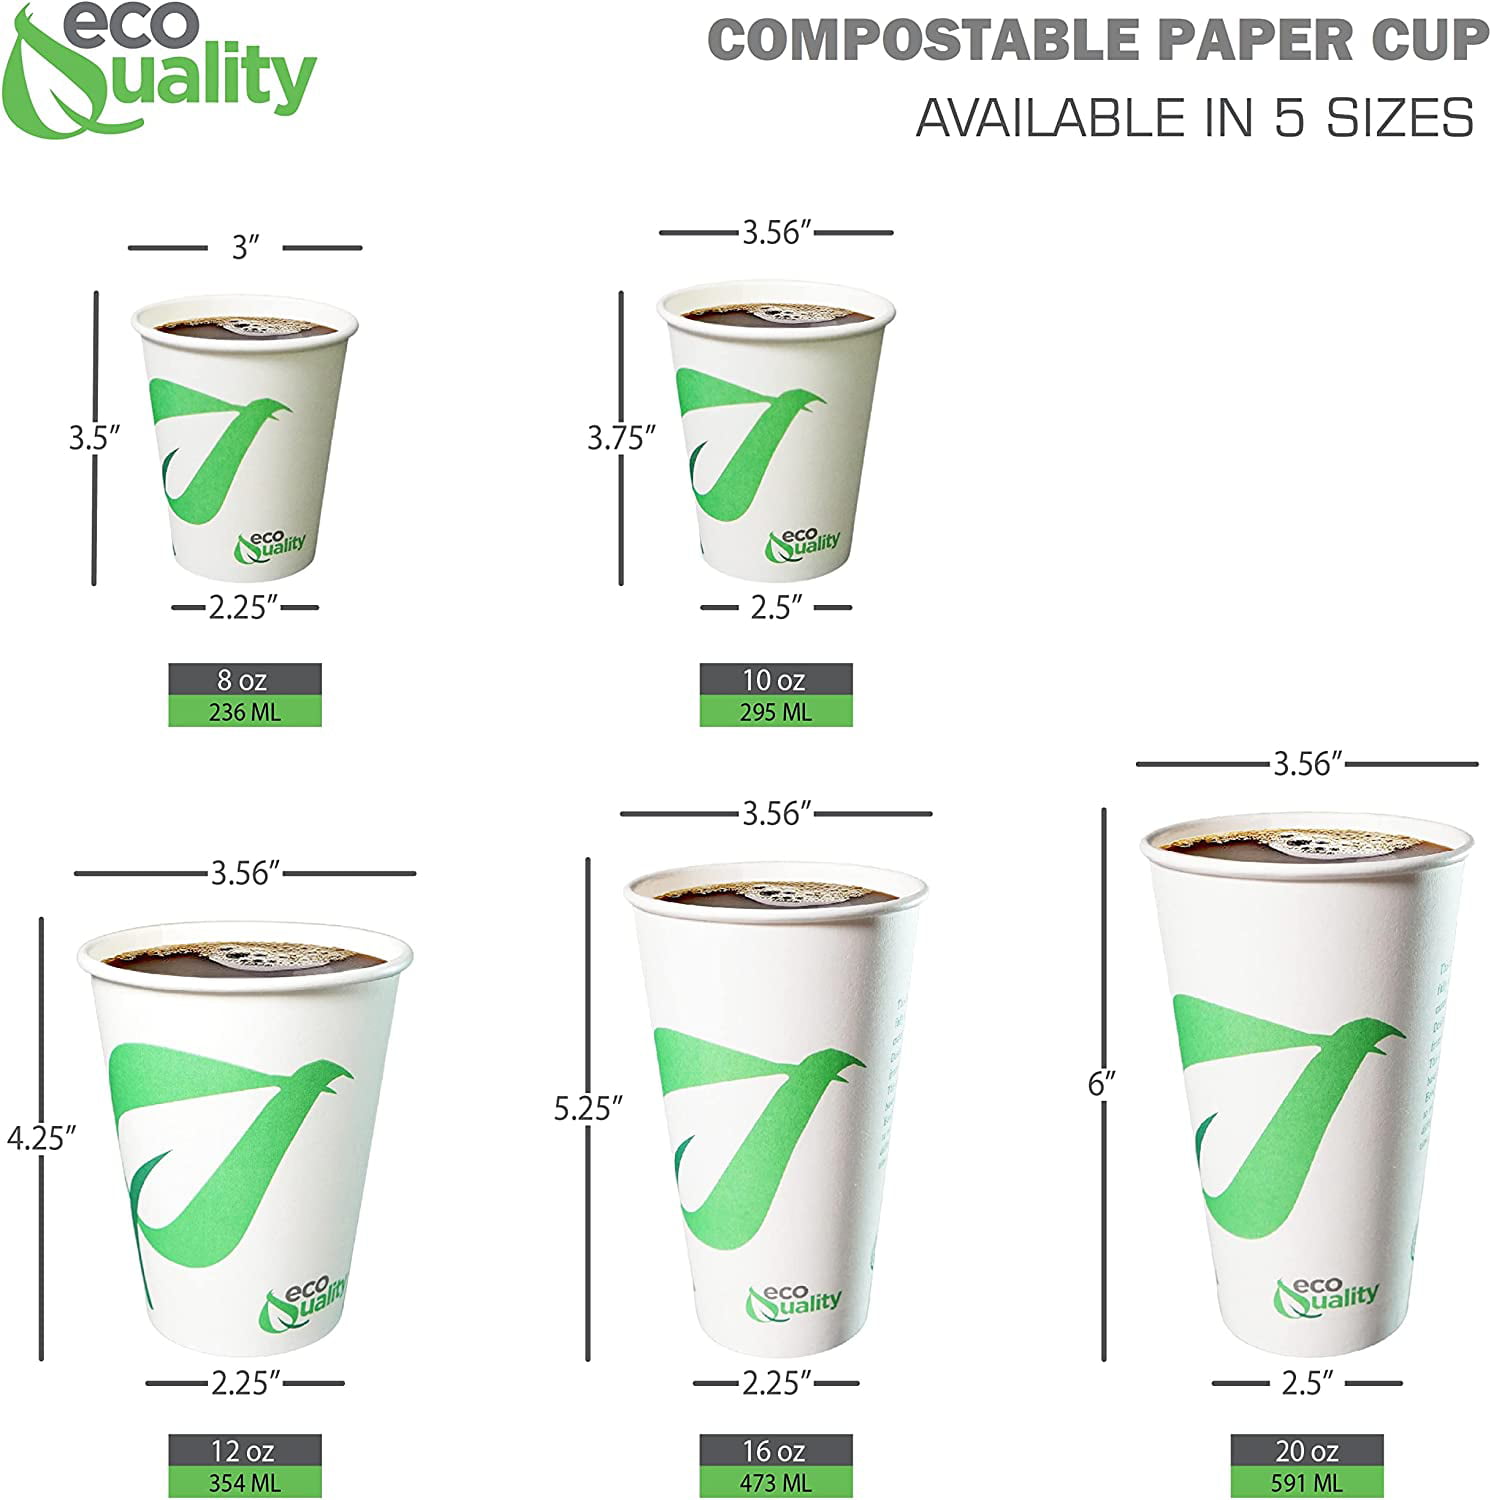 Vegware™ White Hot Drink Cups, Biodegradable Hot Beverage Cups, Compostable Coffee Vending Cups